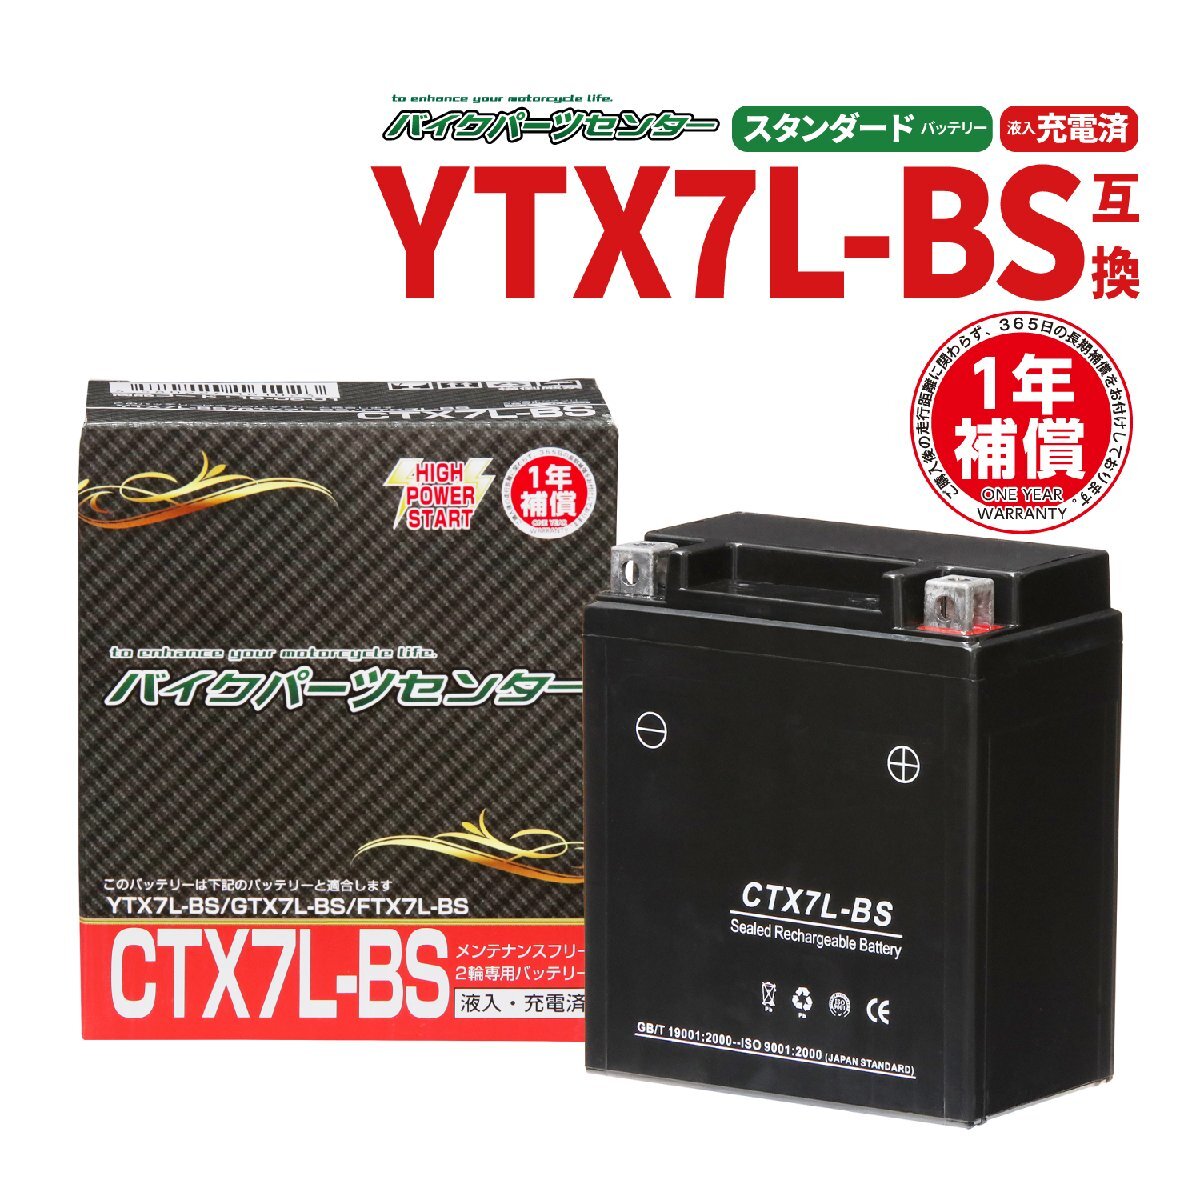 YTX7L-BS互換 CTX7L-BSバイクバッテリー リード110 Dio110 1年間保証 新品 バイクパーツセンターの画像1